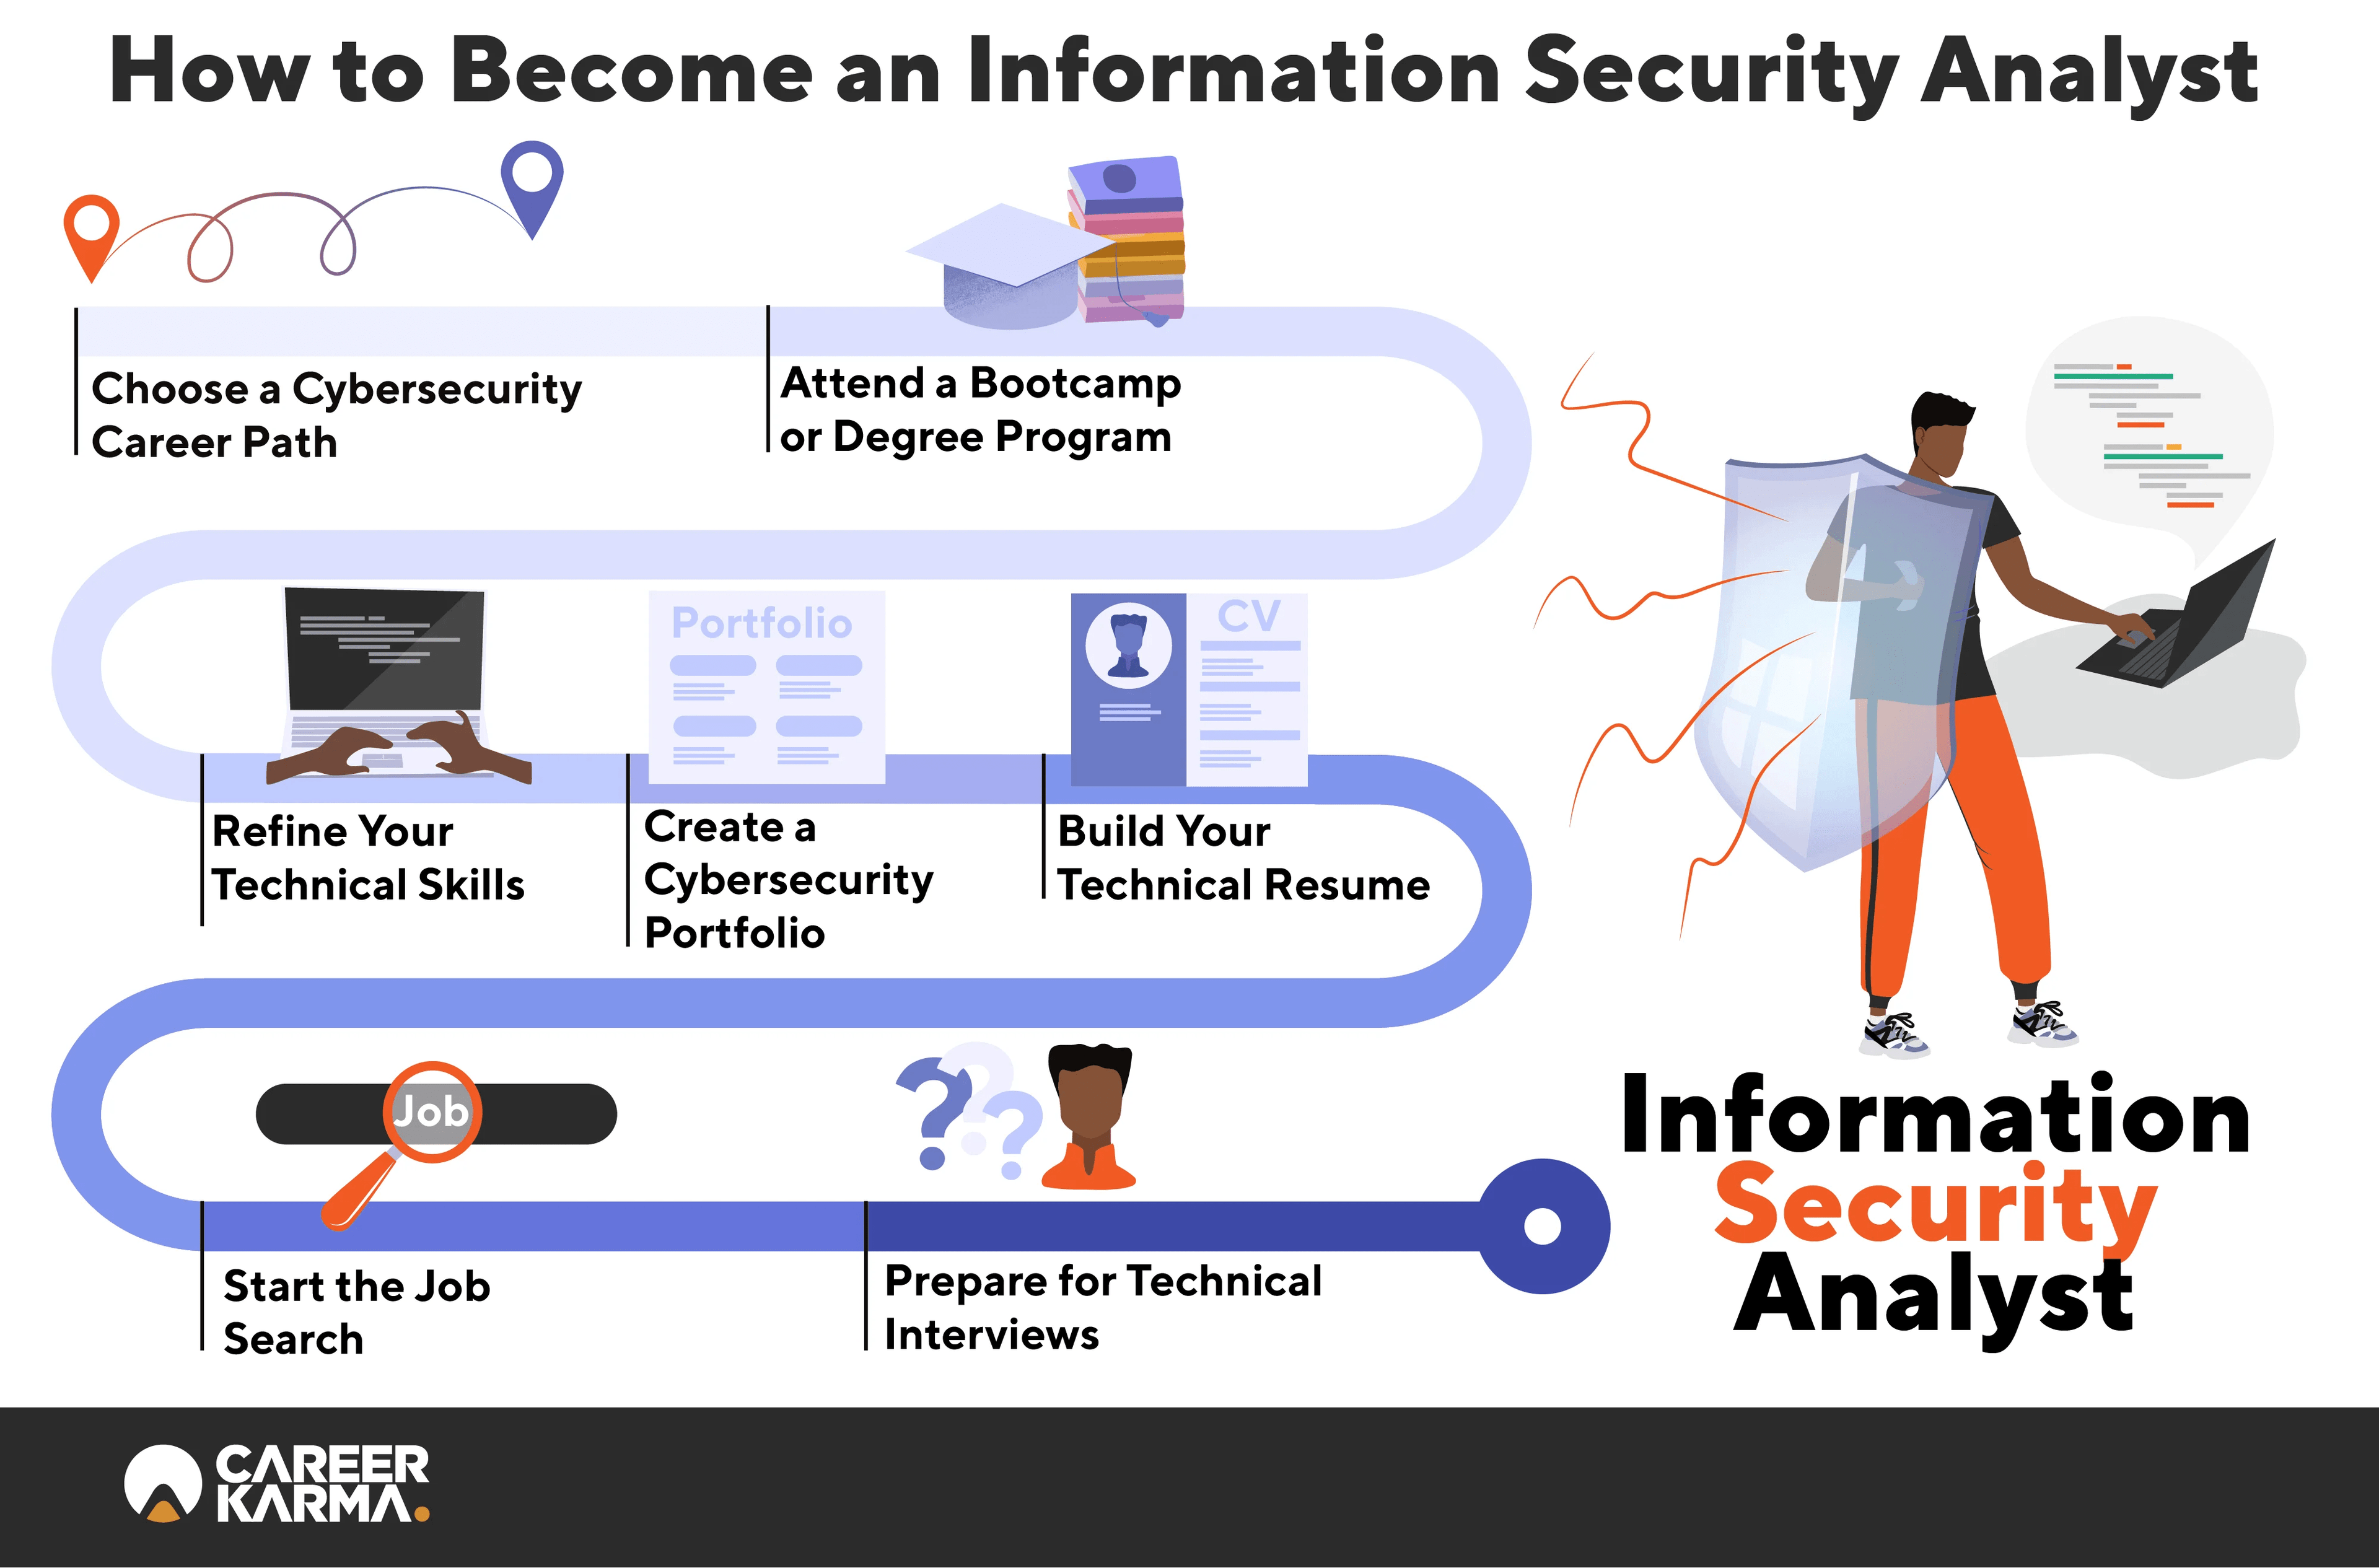 What is an Information Security Analyst? image